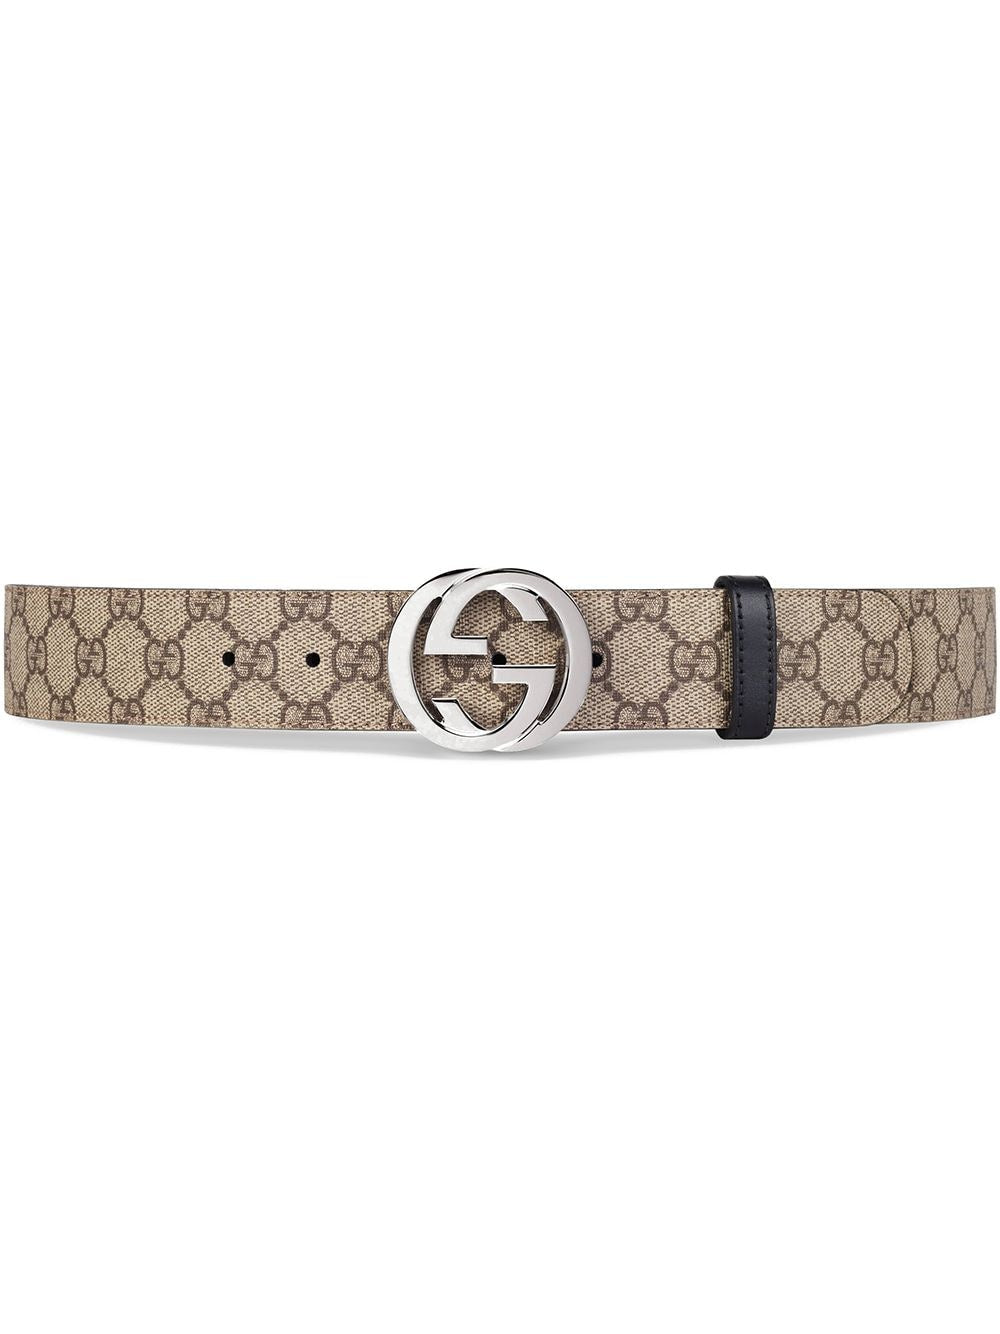 GUCCI REVERSIBLE BELT WITH GG